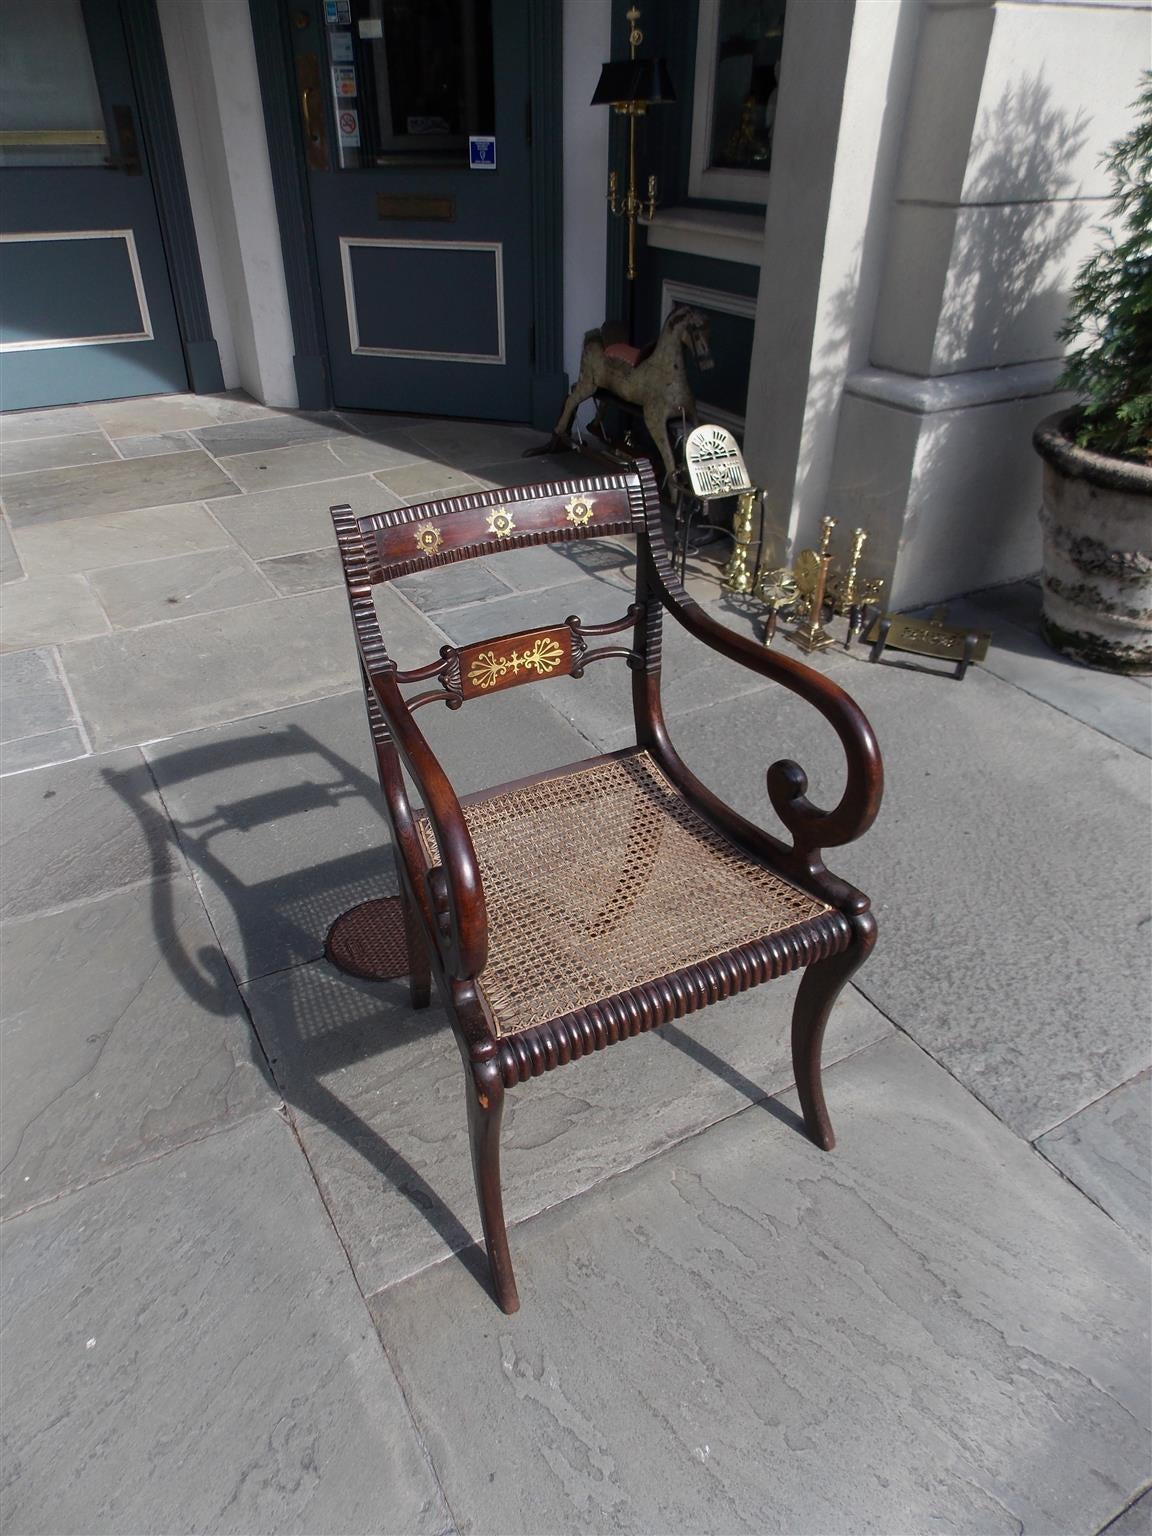 English Regency brass inlaid & faux painted Rosewood arm chair with gadrooning, cane seat, scrolled arms, and terminating on saber legs.  Great desk chair. Early 19th Century.